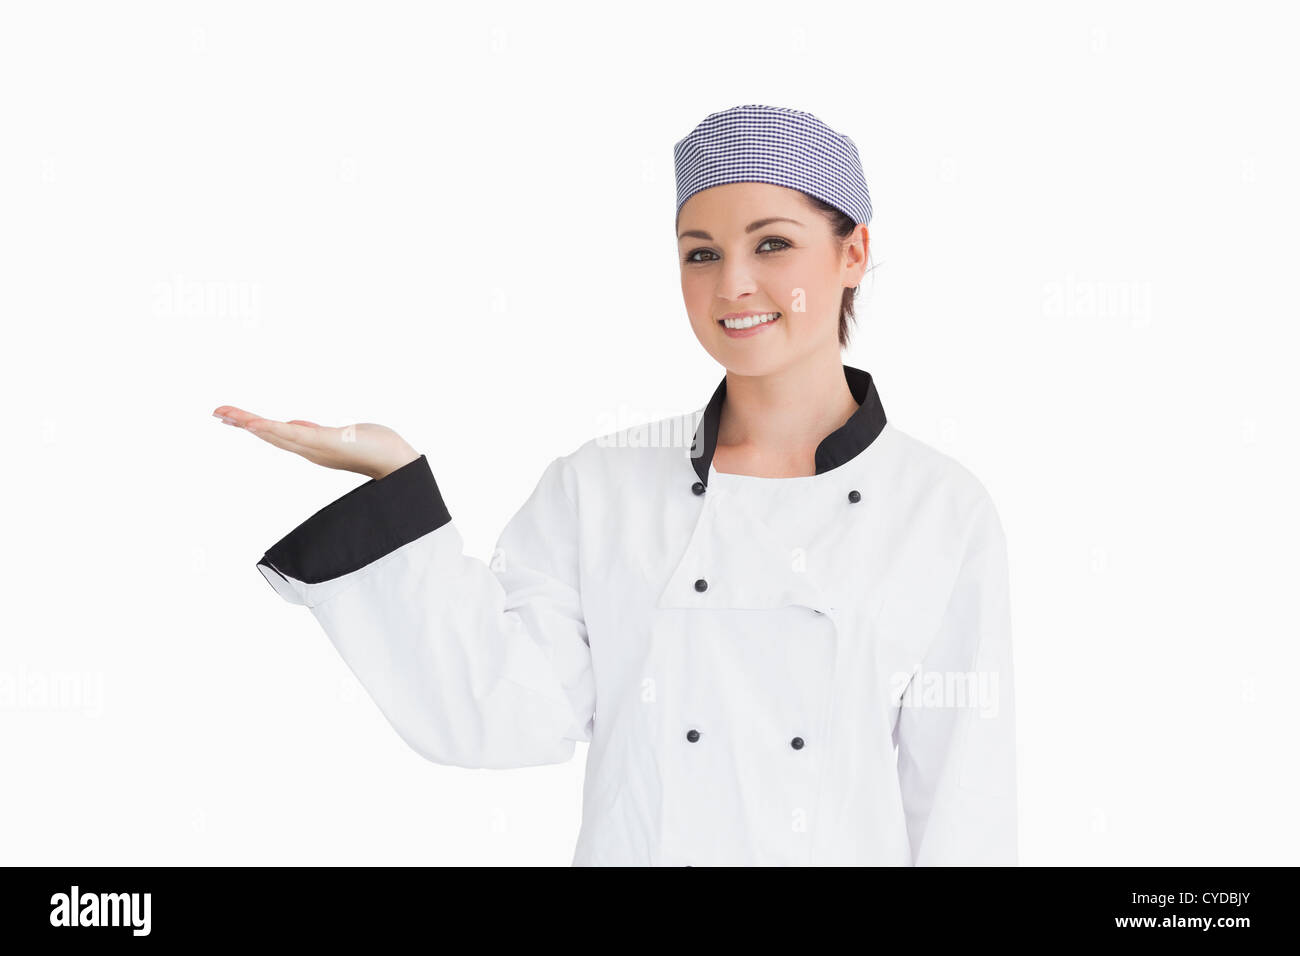 Chef holding out hand in presentation Stock Photo